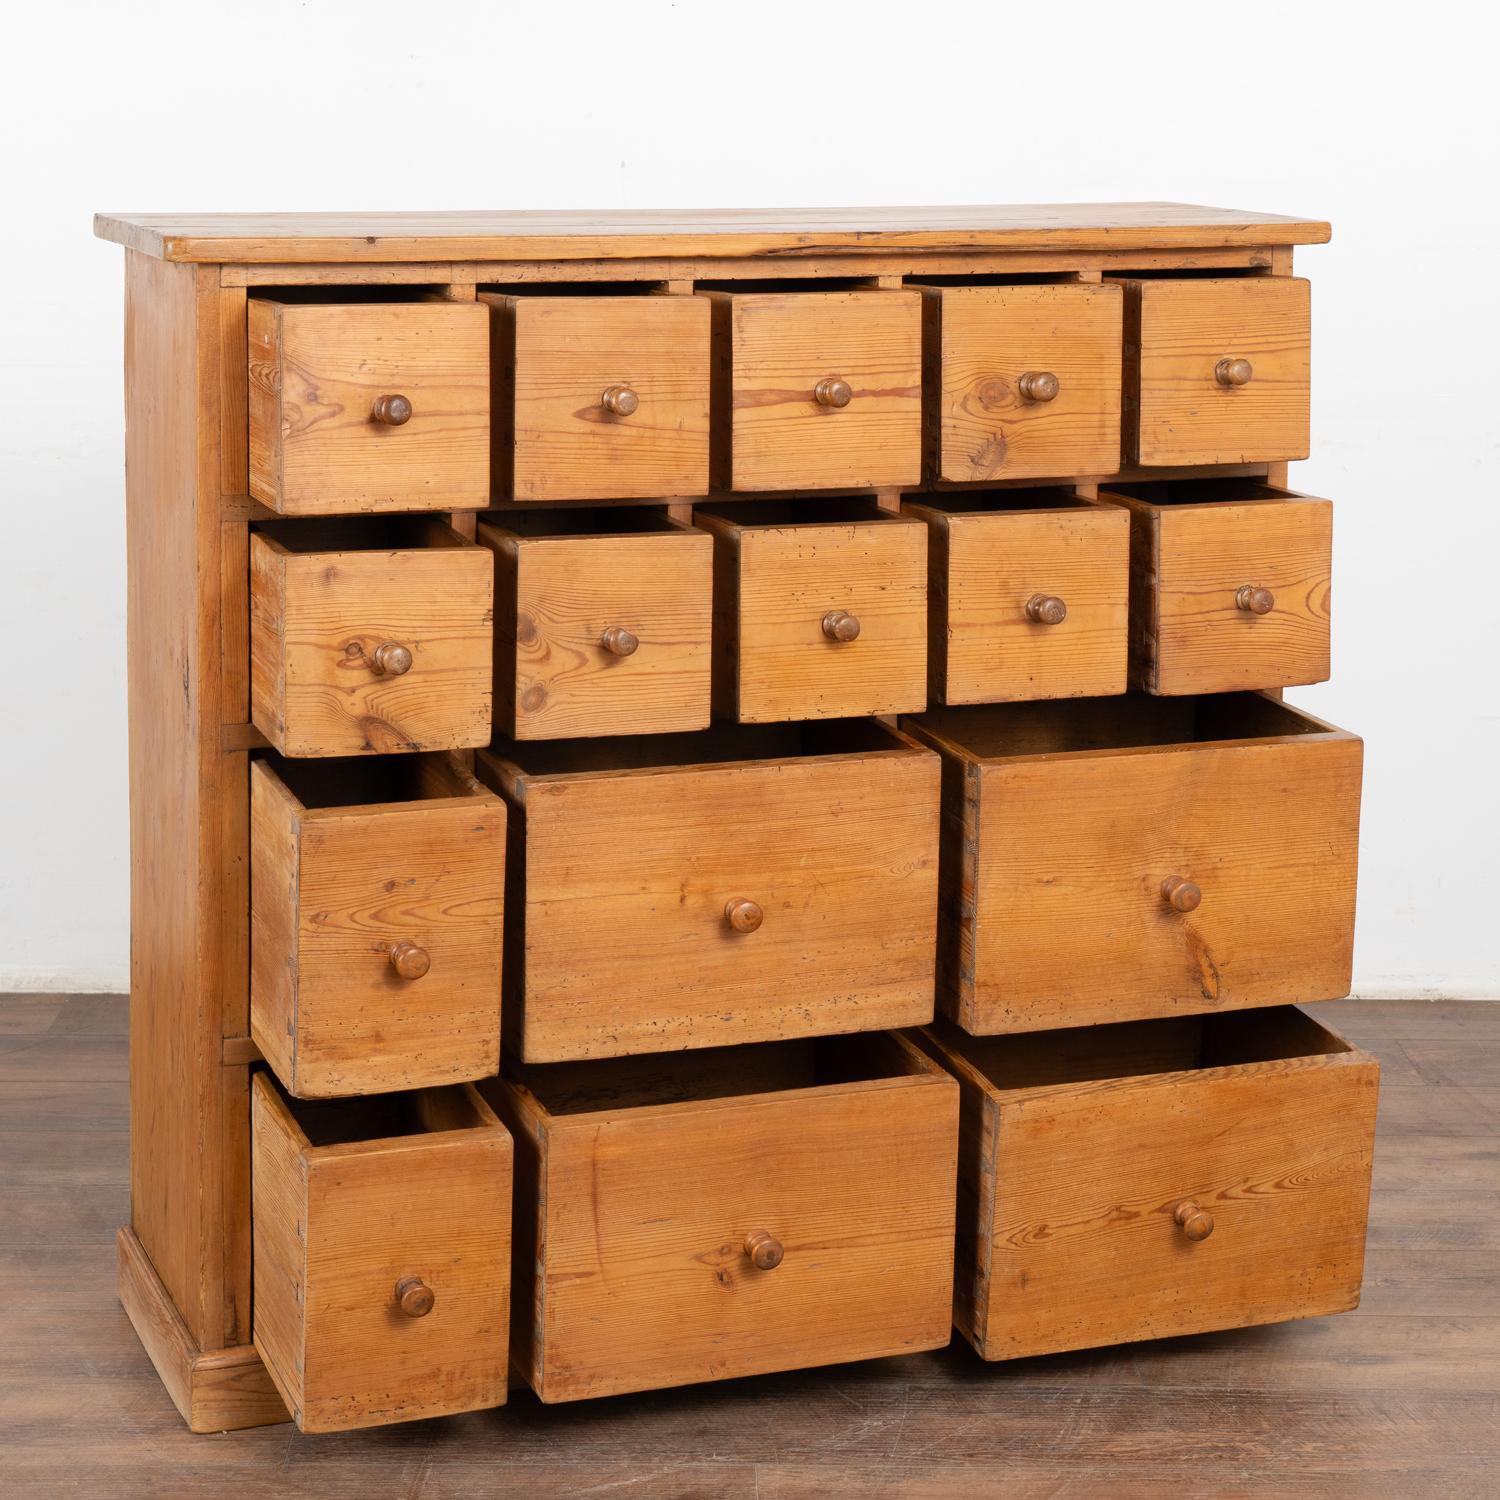 Country Pine Apothecary Console Chest of 16 Drawers, Denmark circa 1880 For Sale